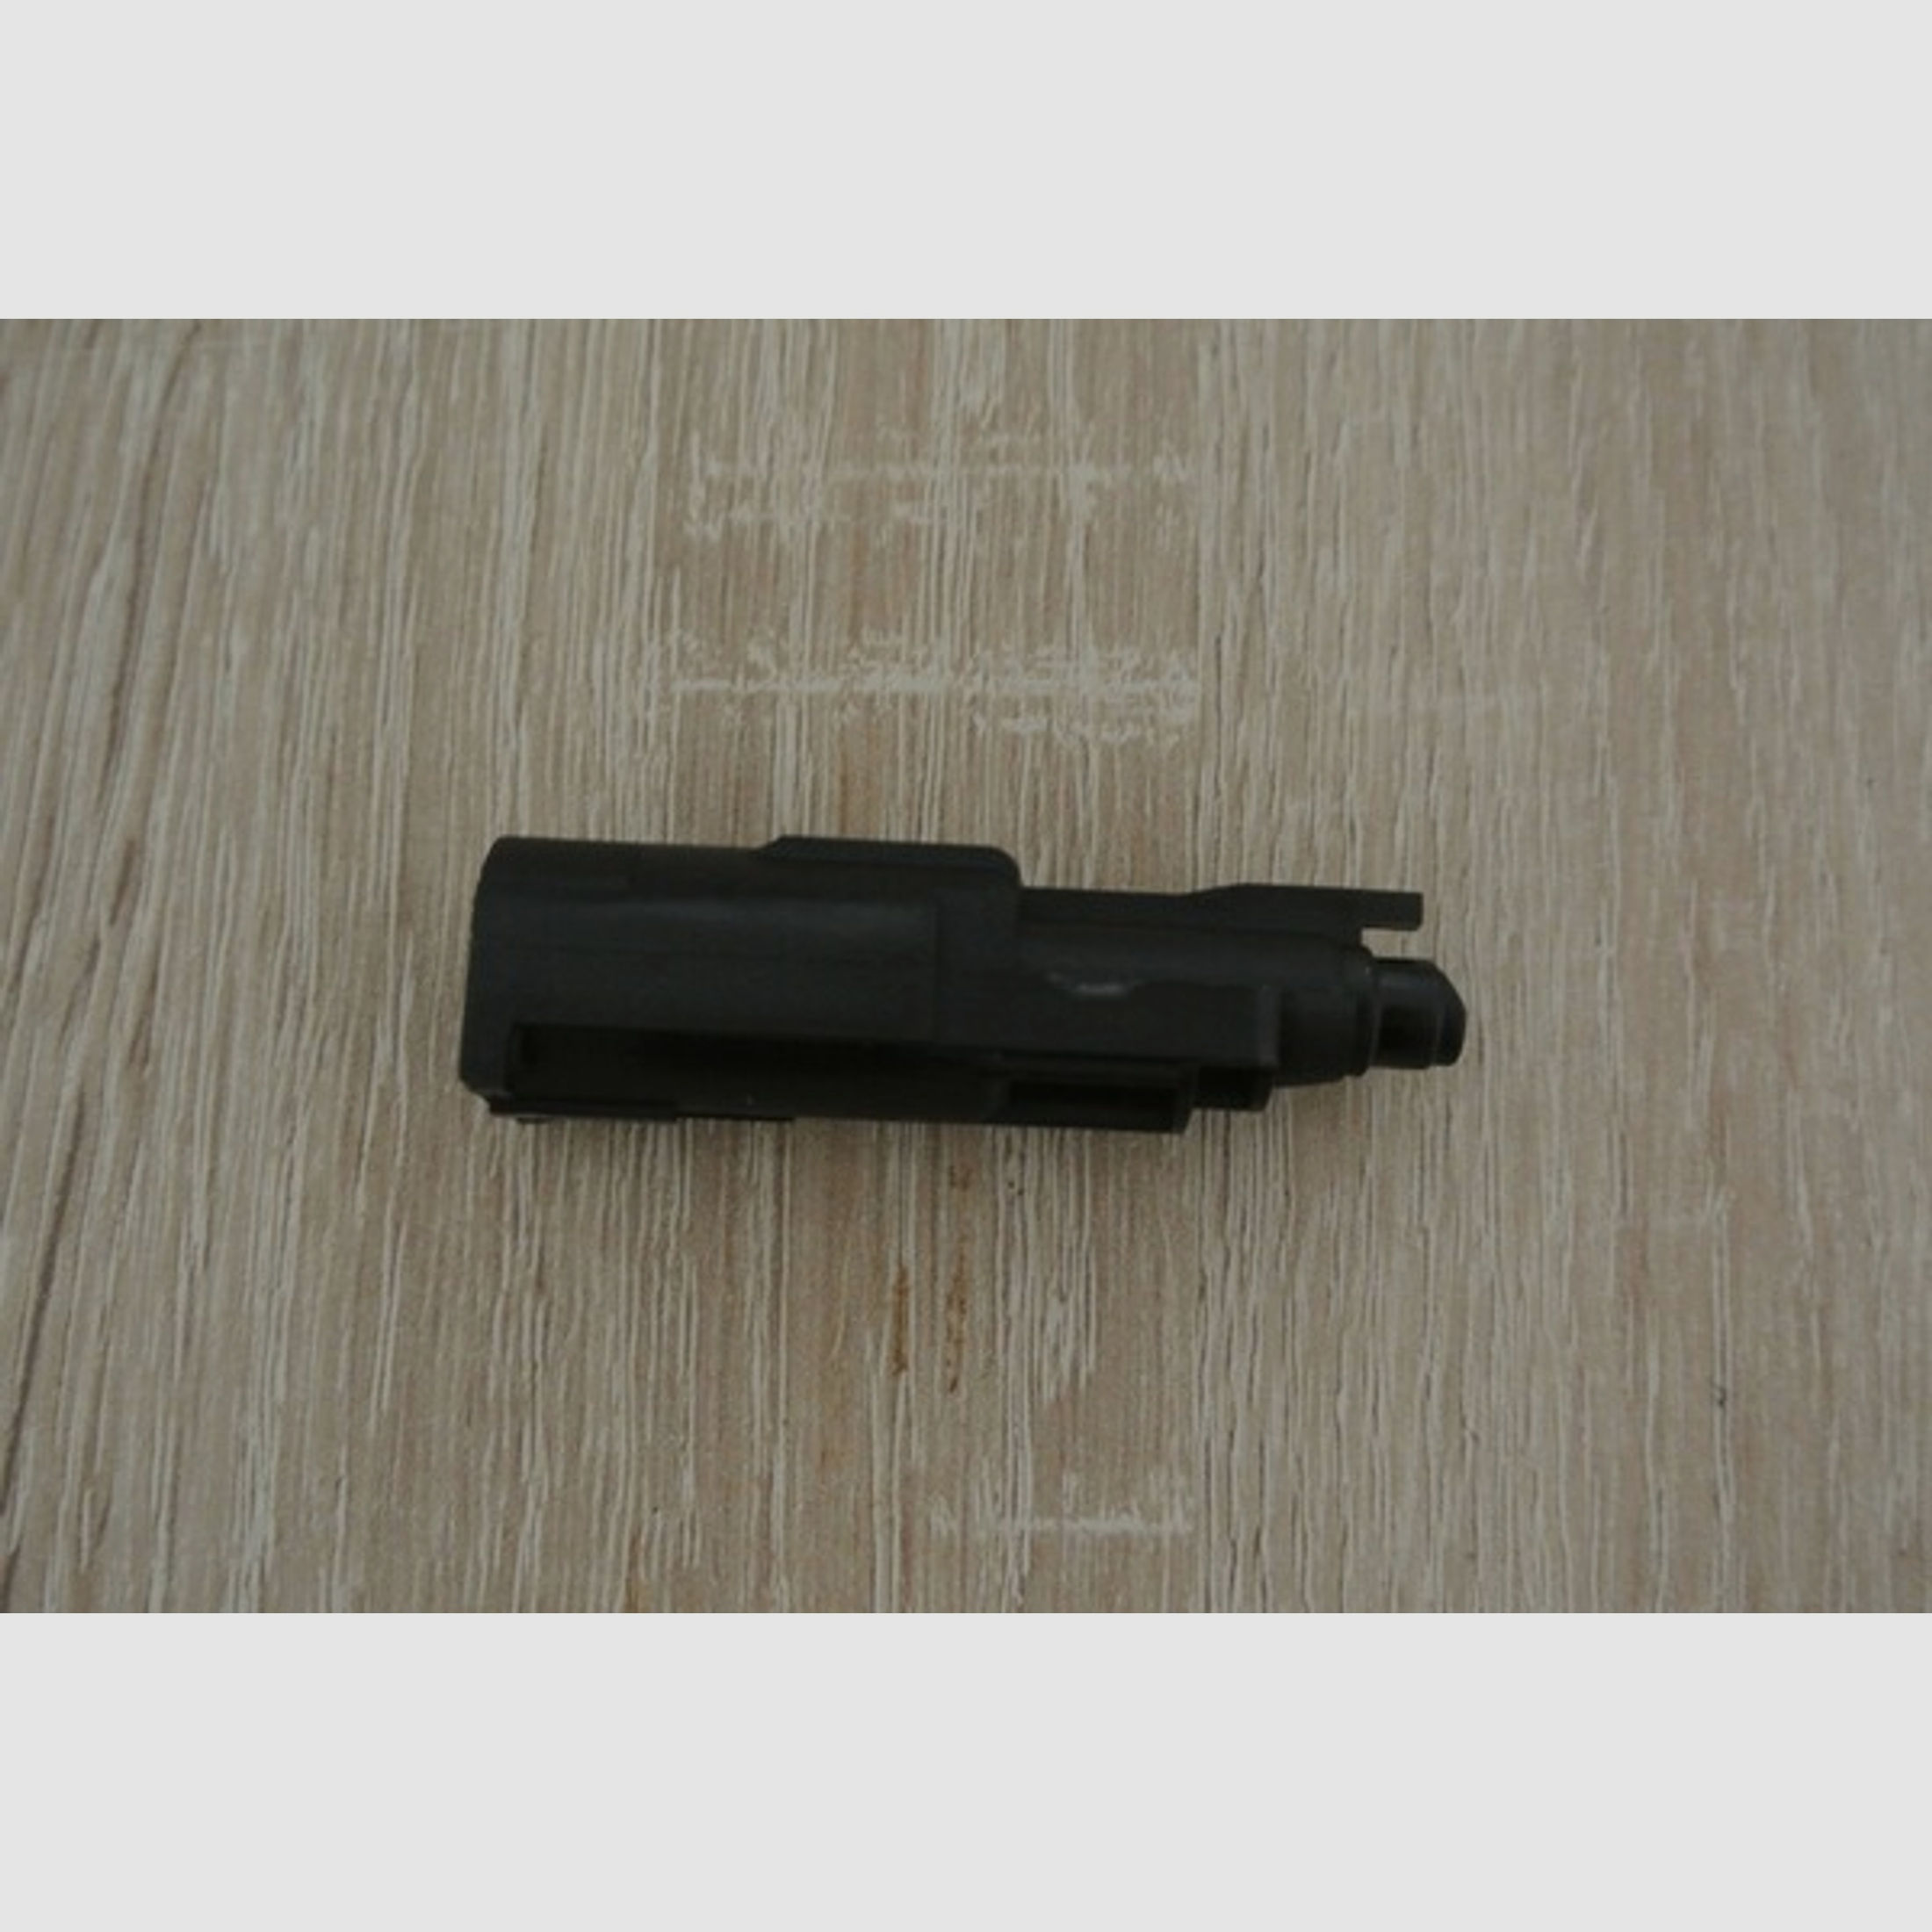 WE loading muzzle for G17 GBB Pistole Airsoft softair 6mm we-pl-ldm-g17